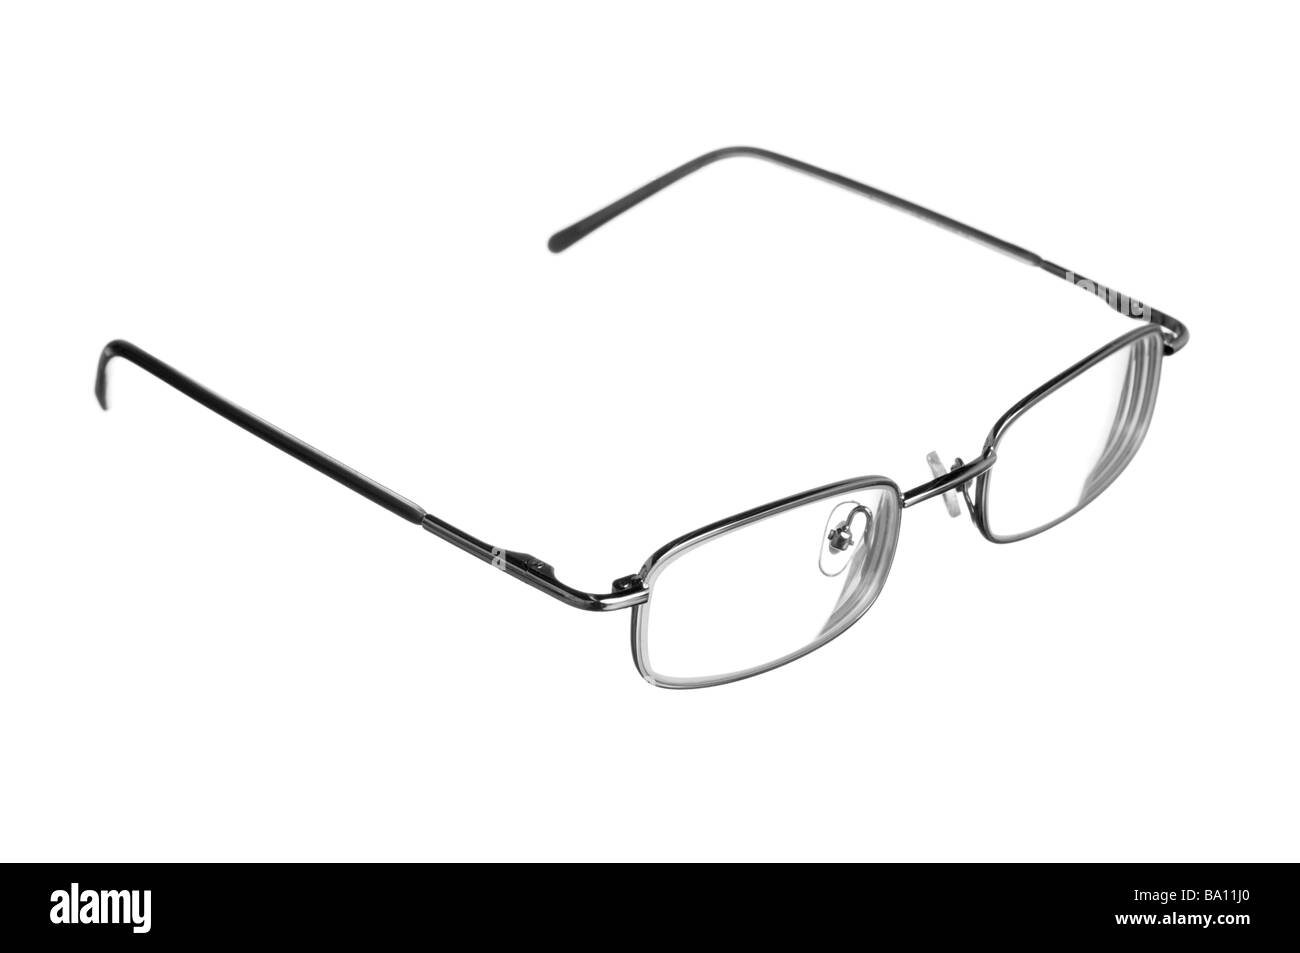 Spectacles glasses Stock Photo